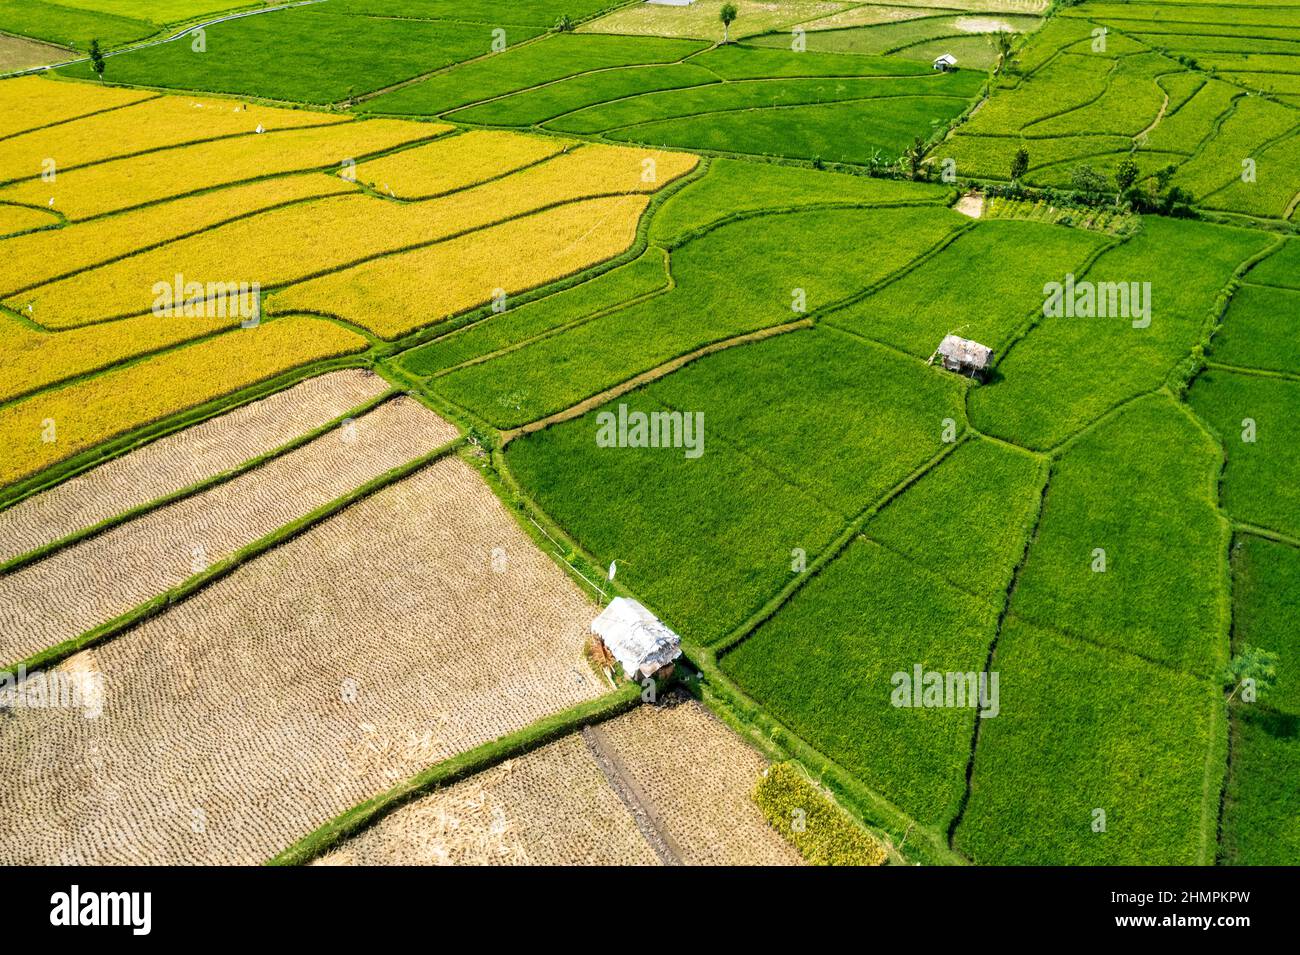 Aerial view of tropical rice fields, Lombok, Indonesia Stock Photo